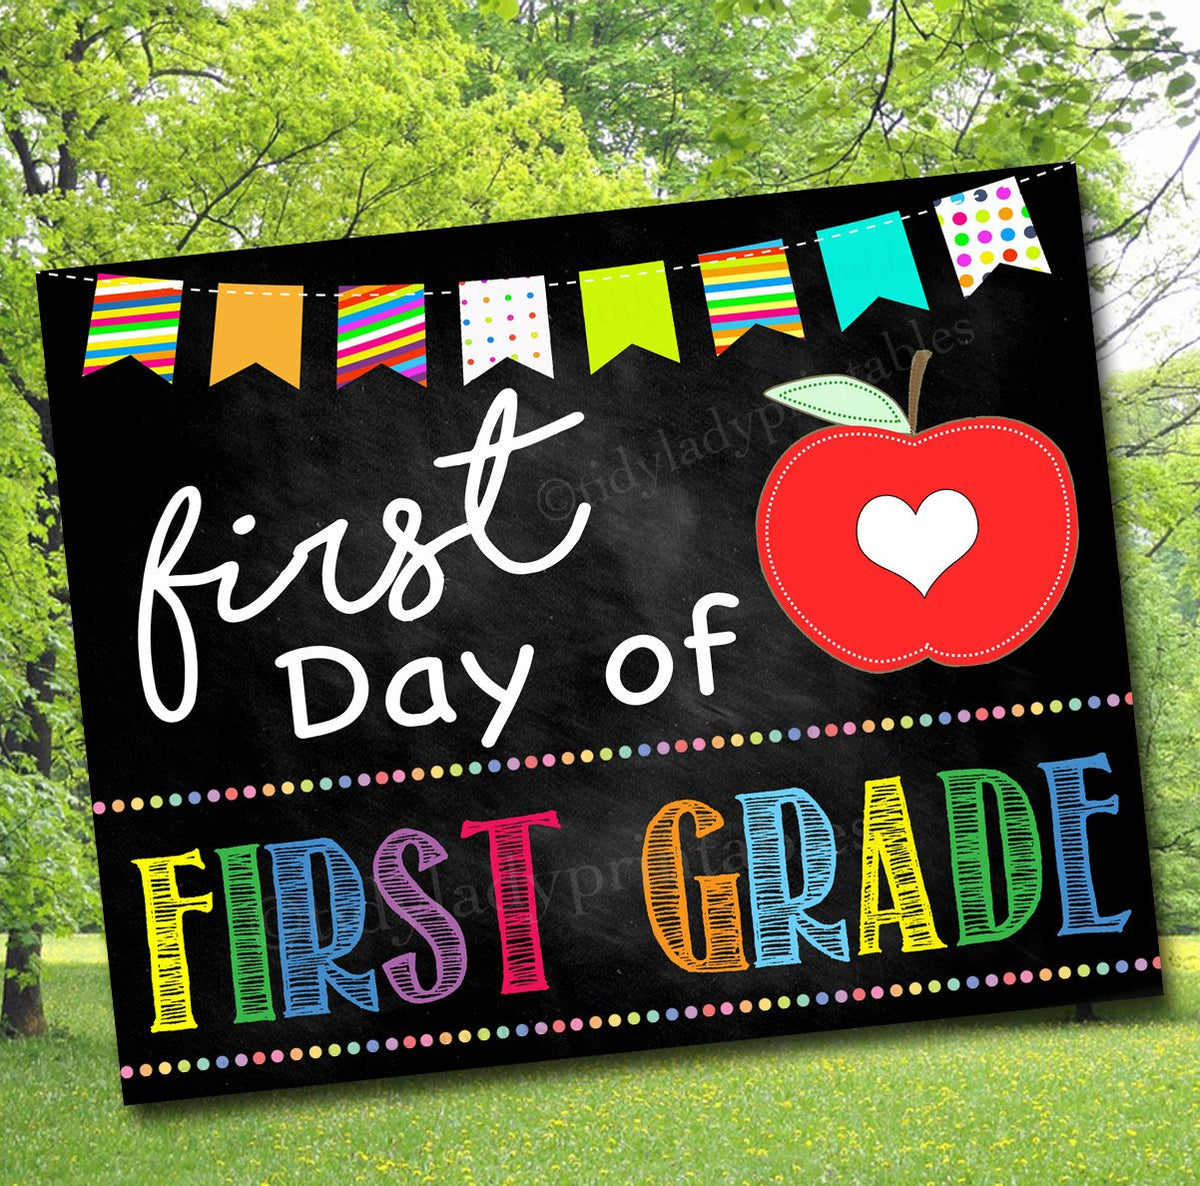 first-day-of-1st-grade-printable